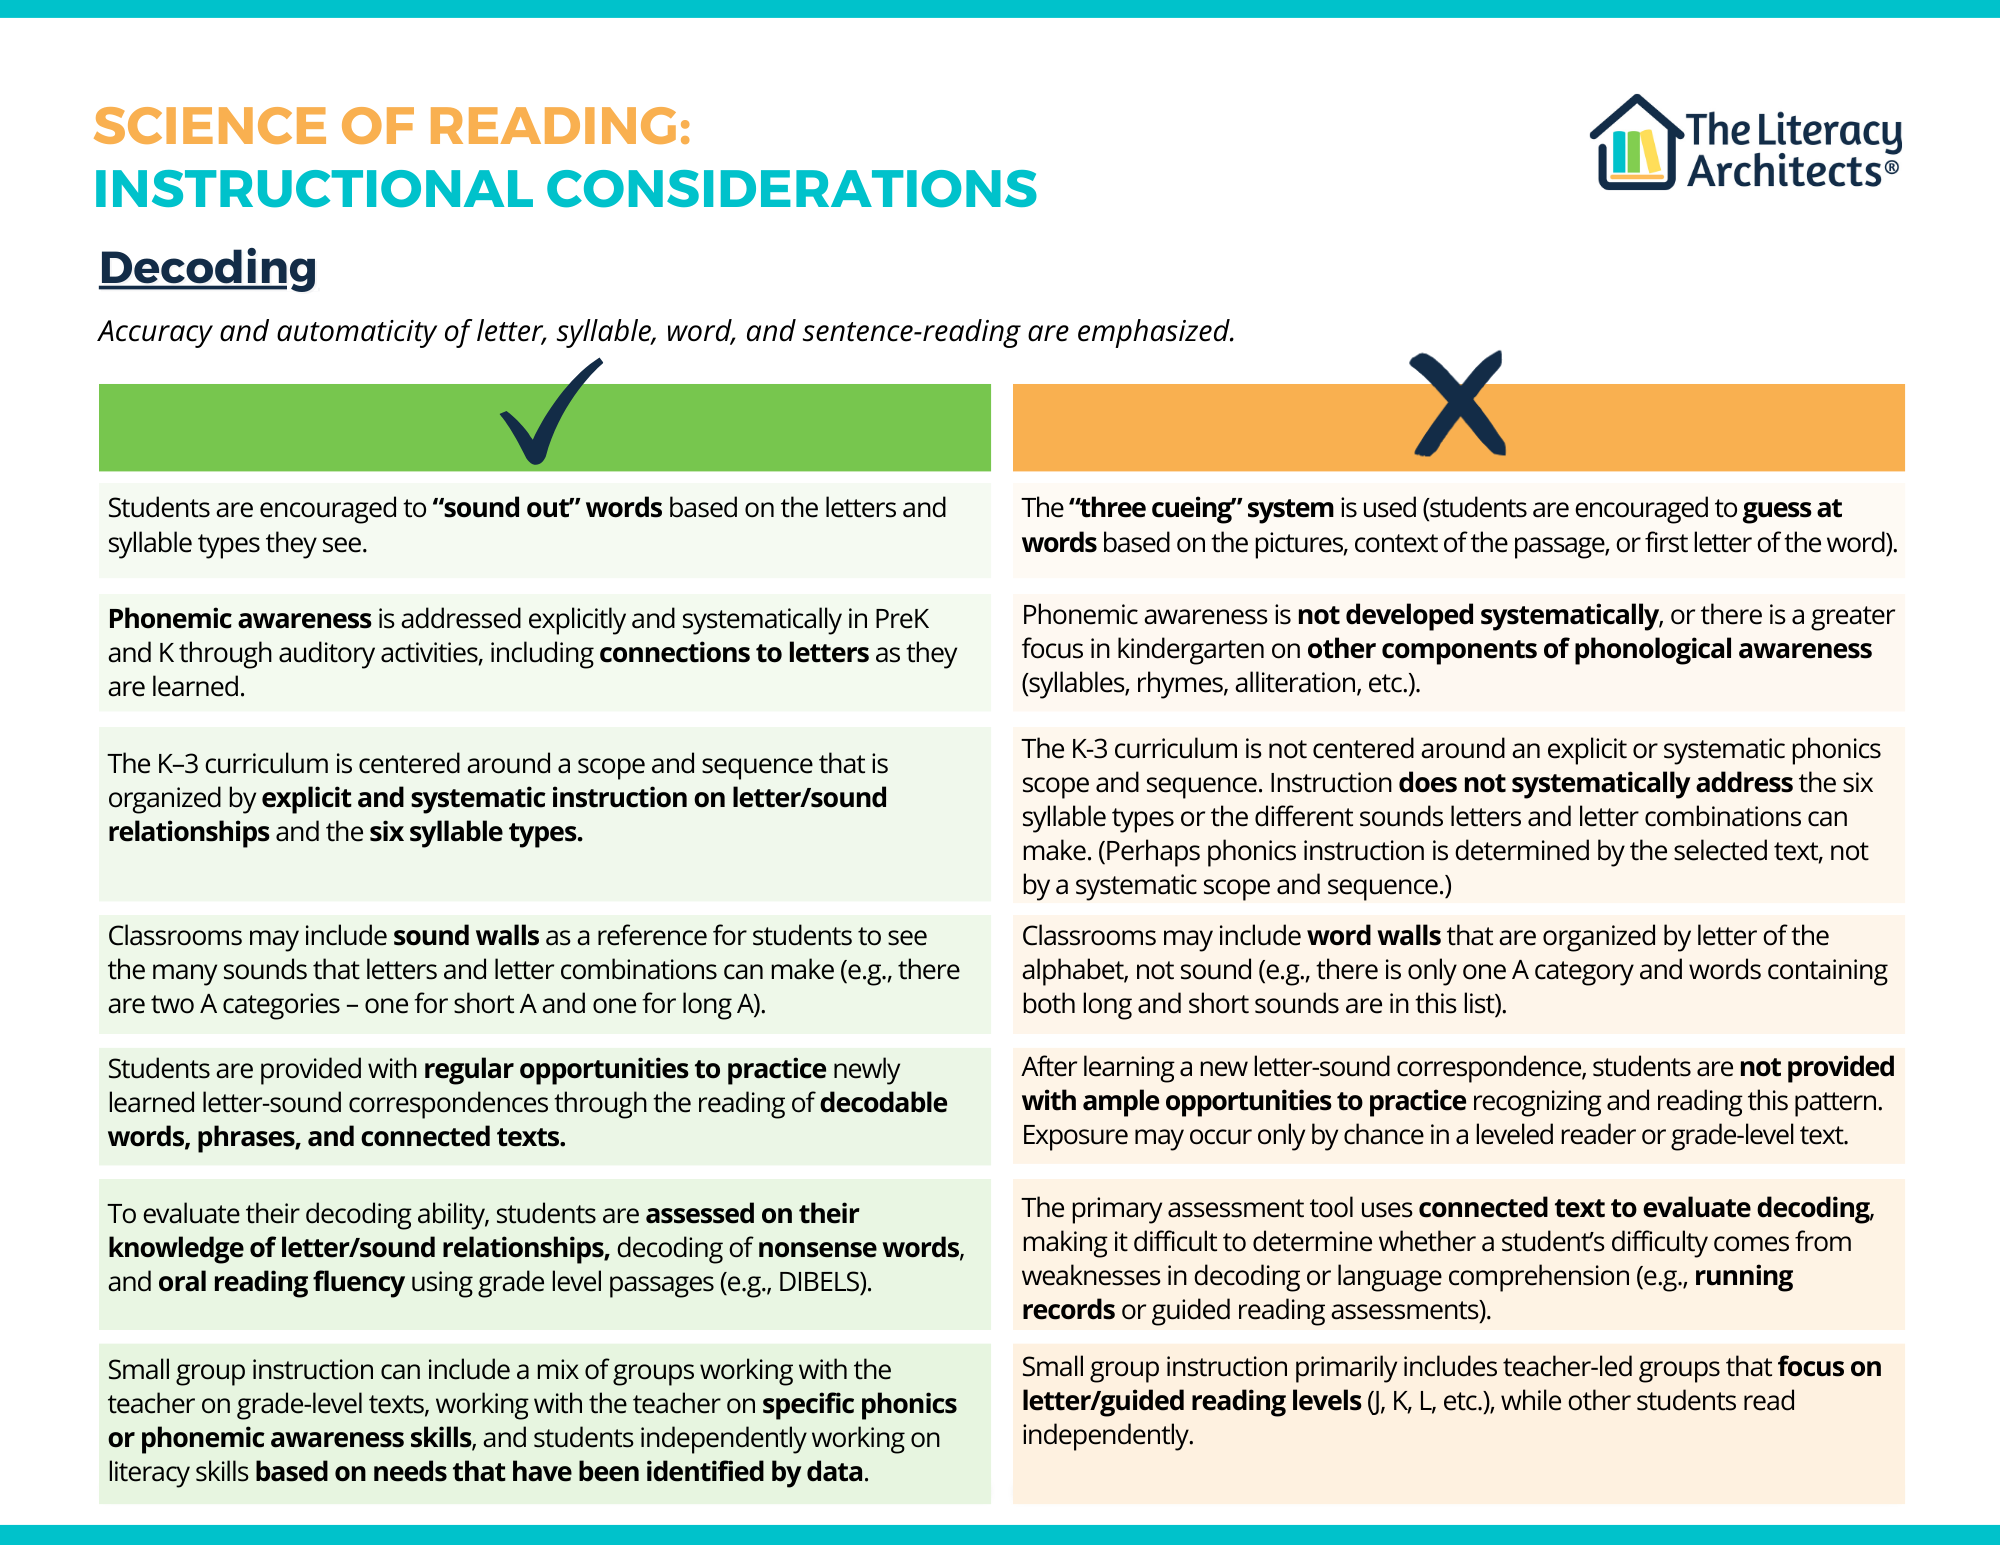 Science of Reading Instructional Considerations